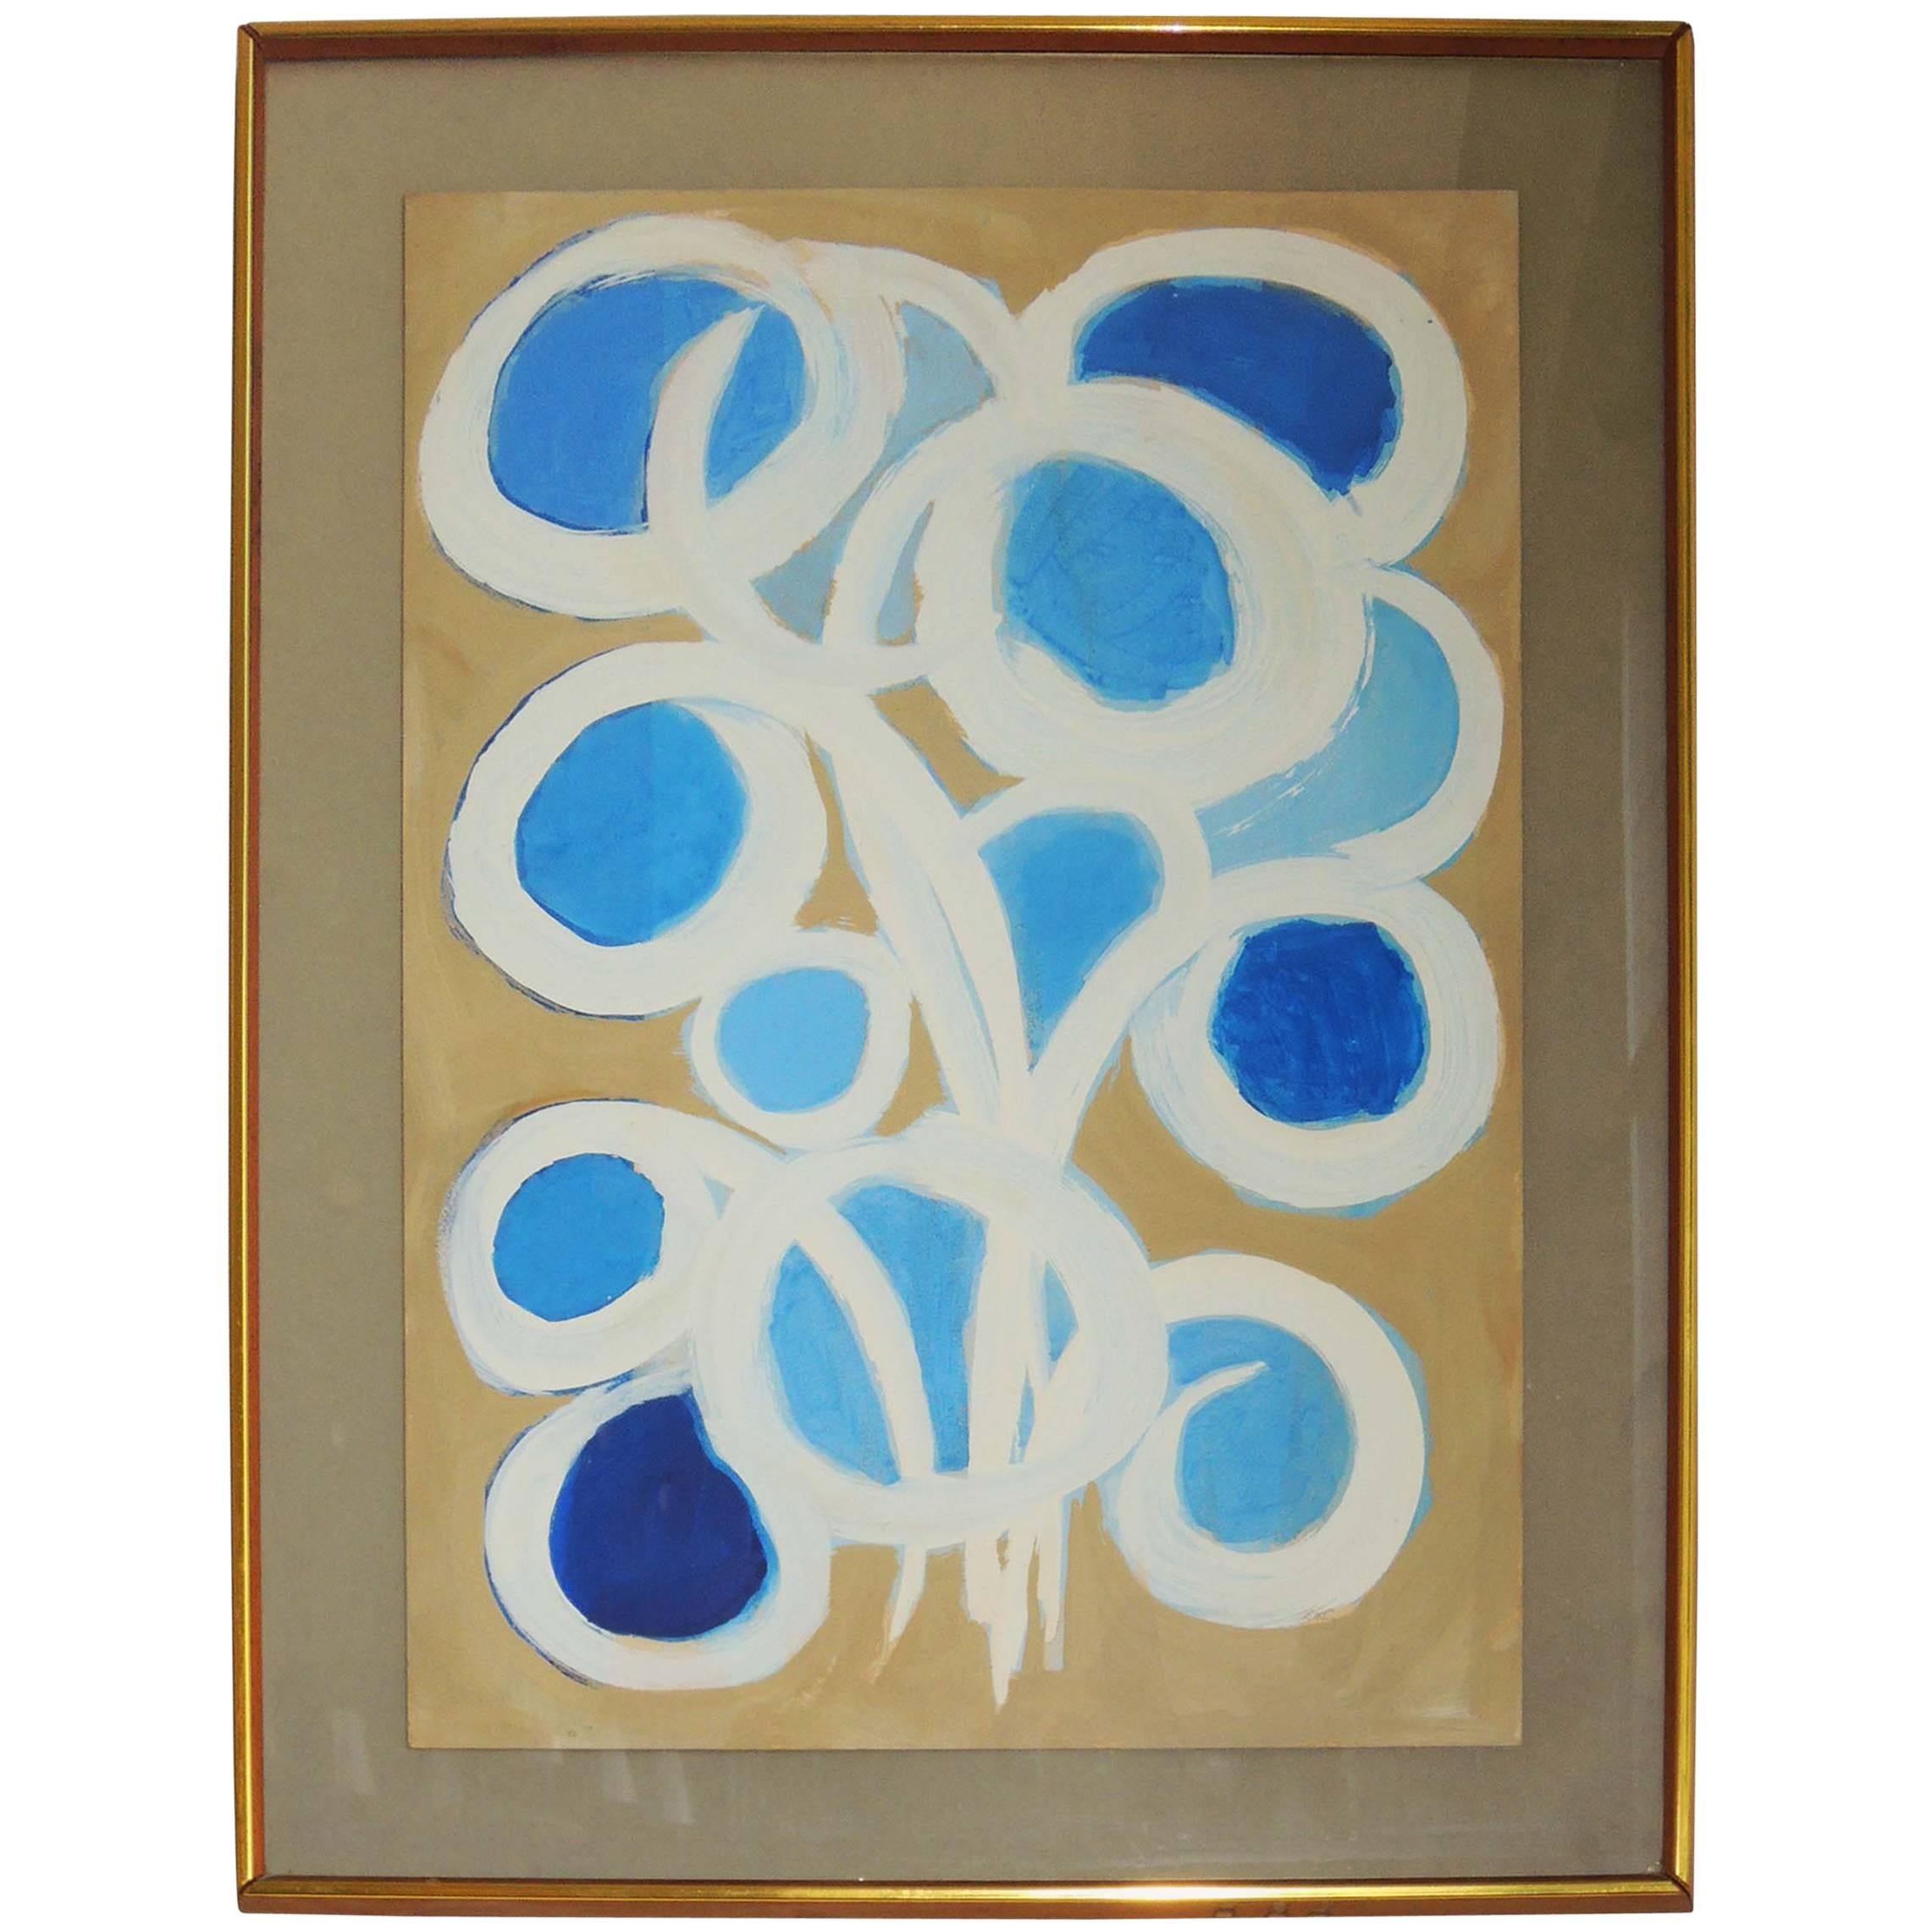 Abstract Painting by Emlen Etting "Eclat Du Jour", 1964